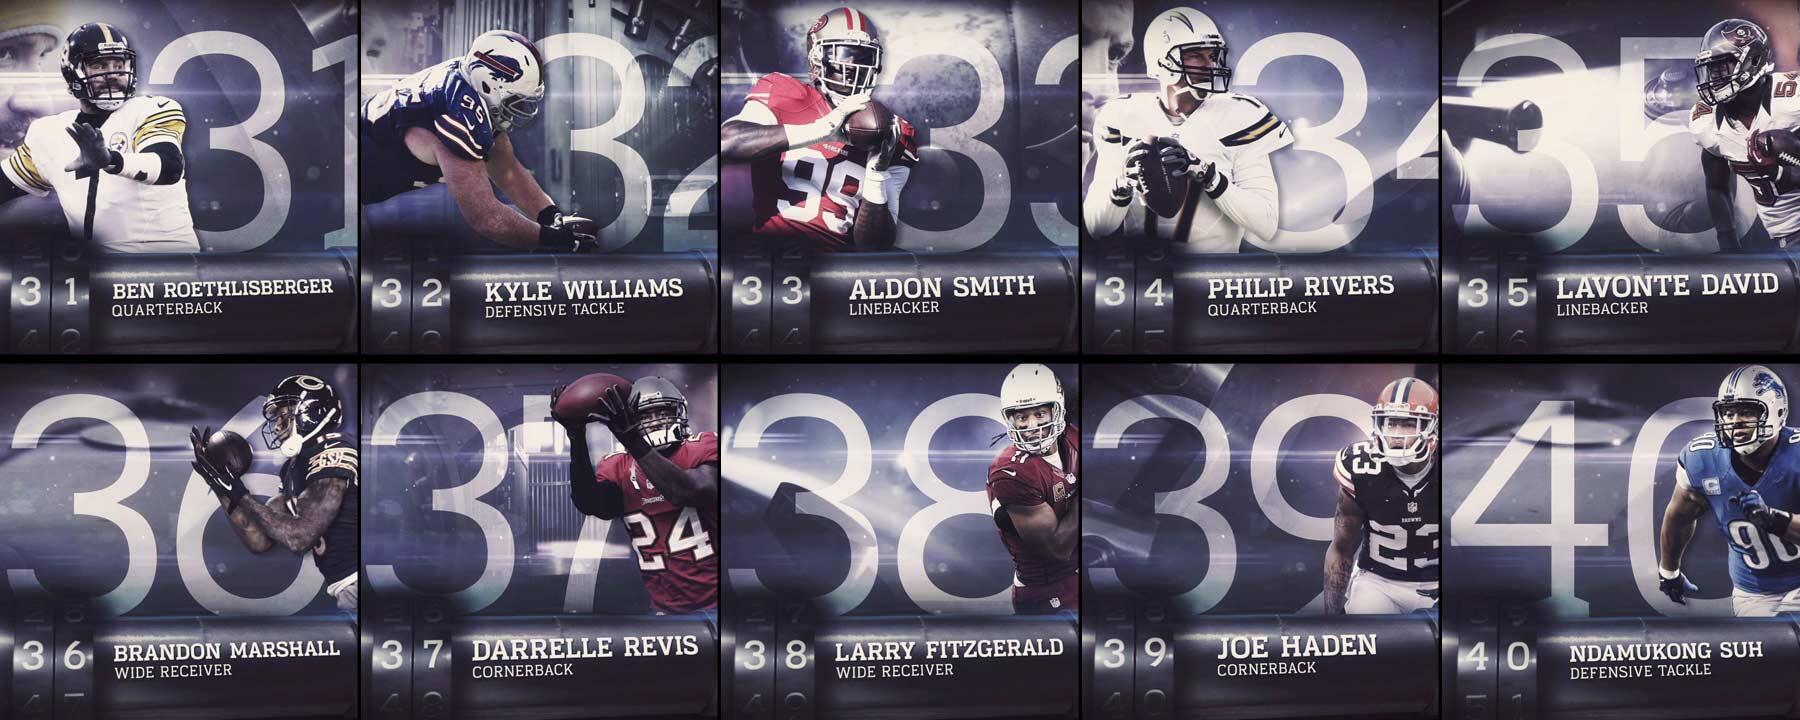 on Twitter: "The Top 100 Players of 2014 (#40-31): #NFLTop100 http://t.co/Tfi4Ei0ntd" / Twitter